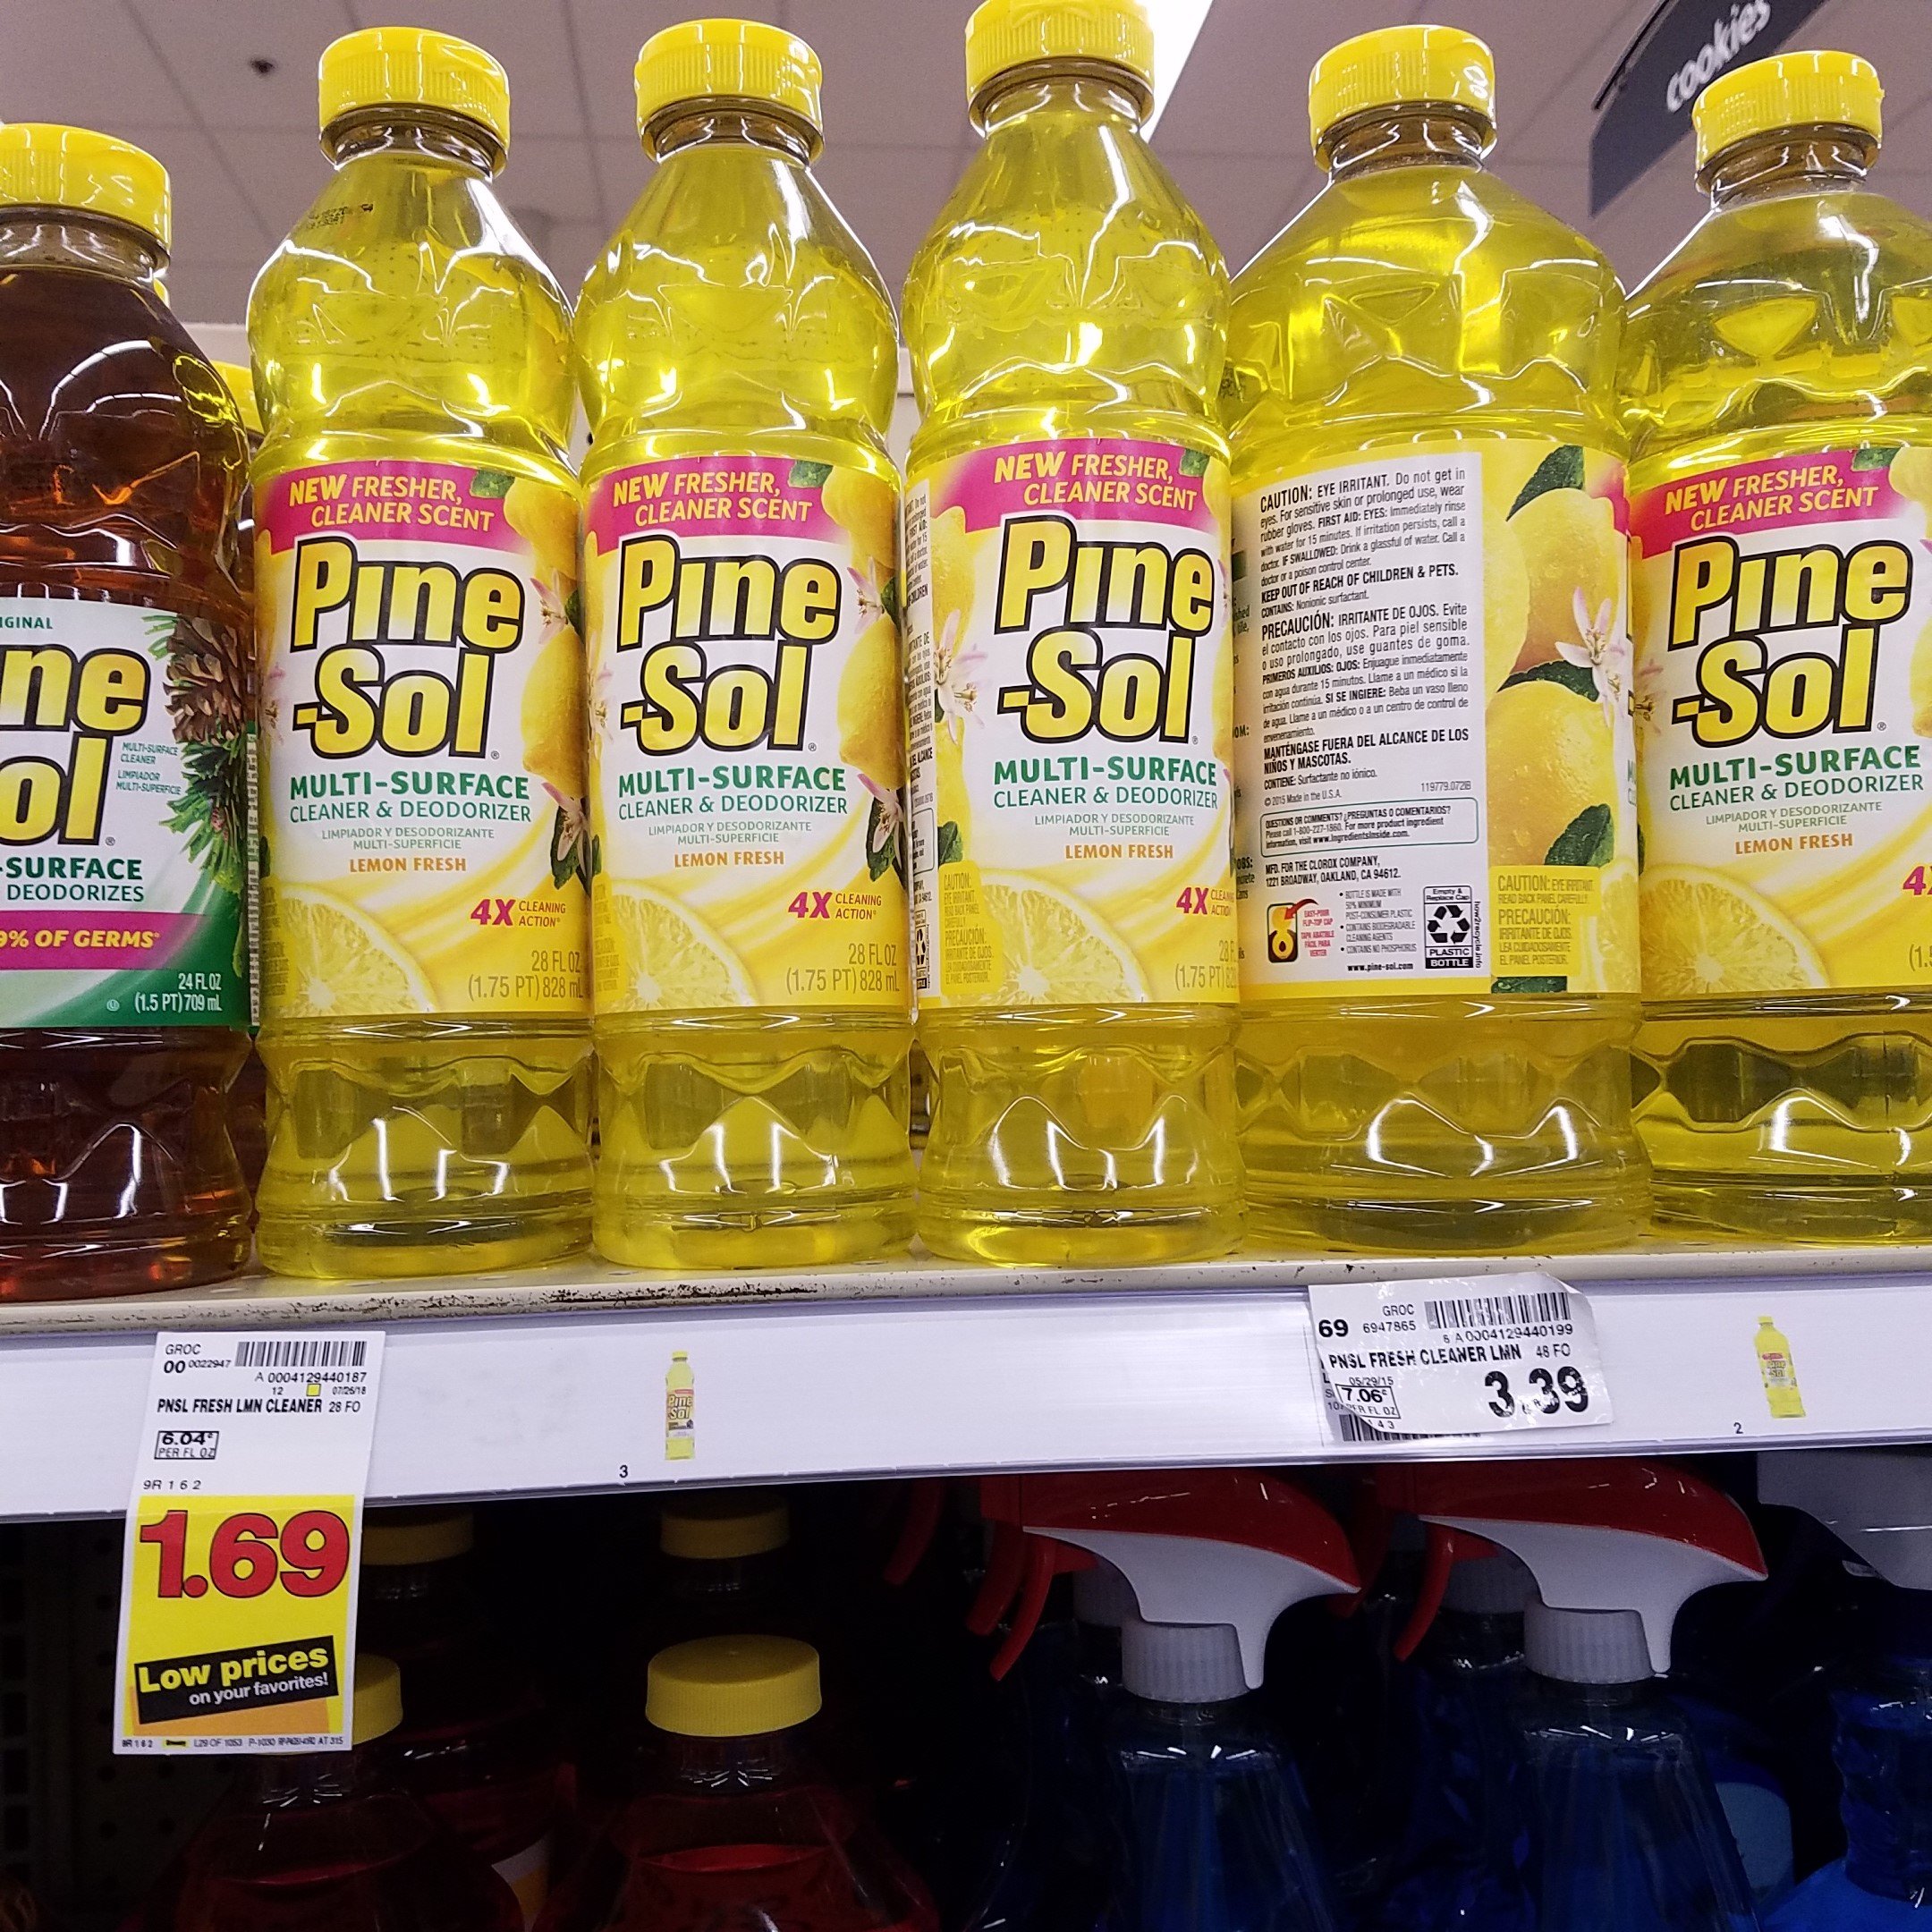 Pine Sol Cleaner just $1.19